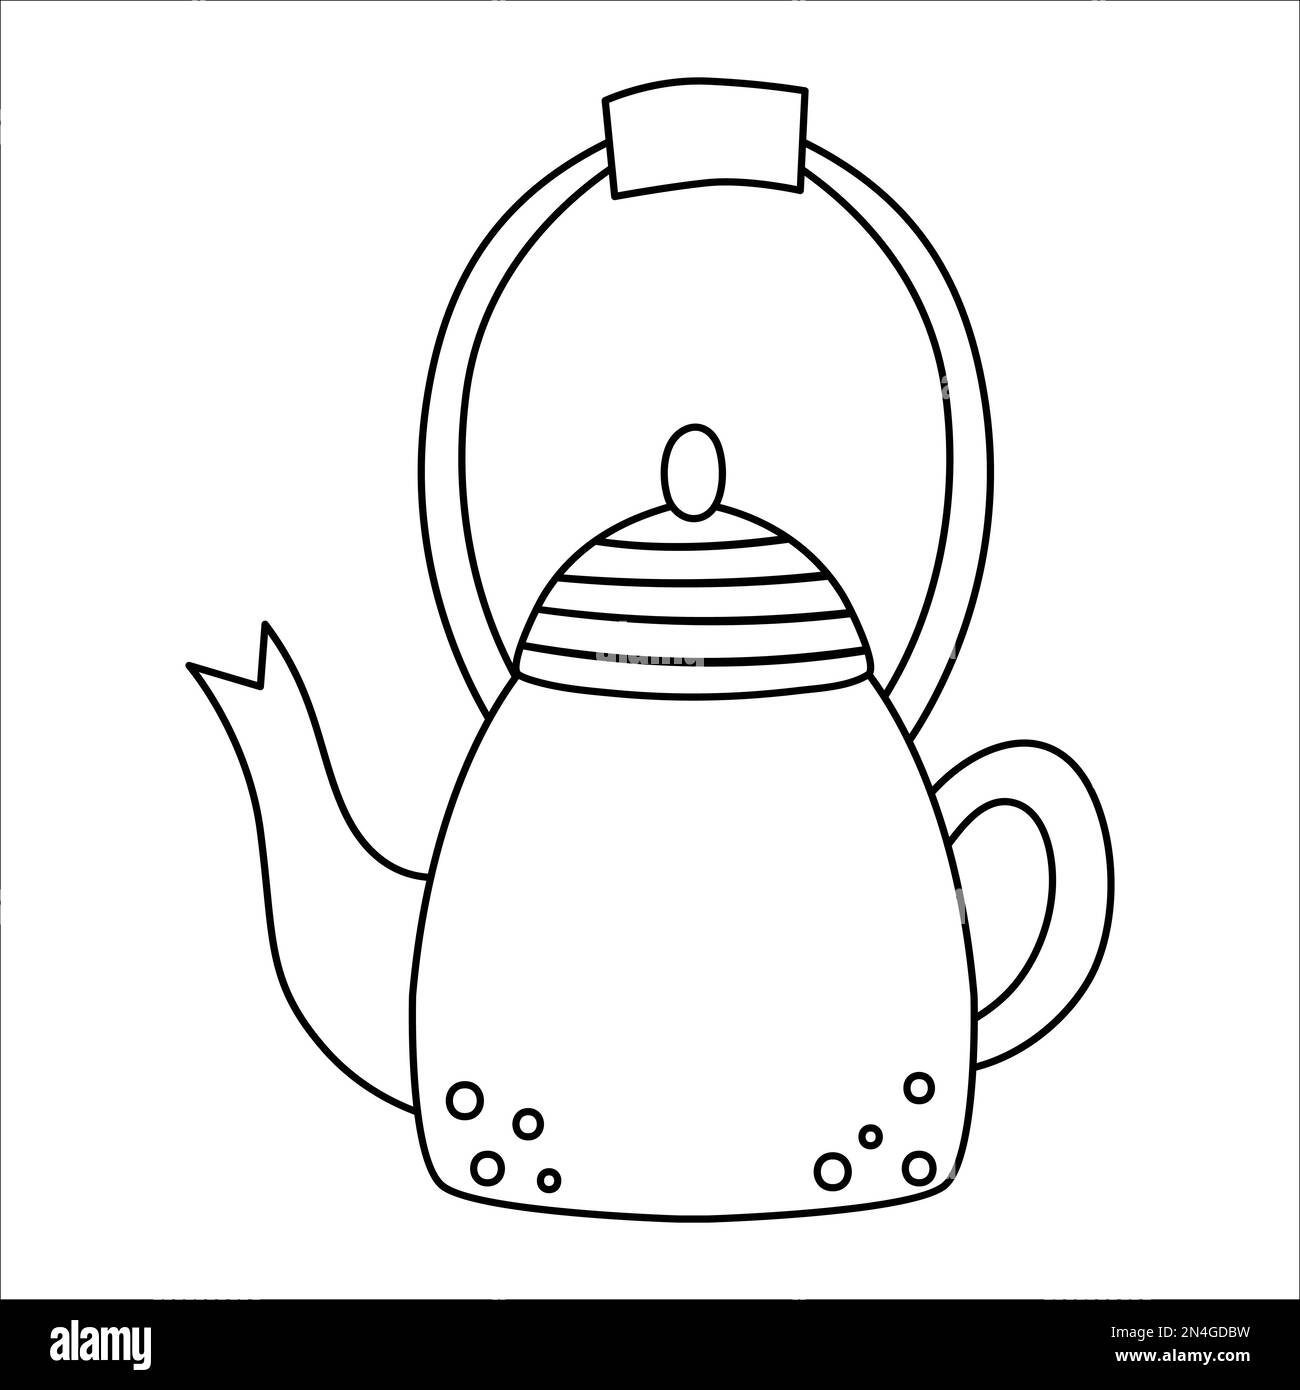 Vector black and white teapot icon. Kawaii tea pot illustration. Outline kettle isolated on white background. Linear art kitchen or hiking equipment Stock Vector